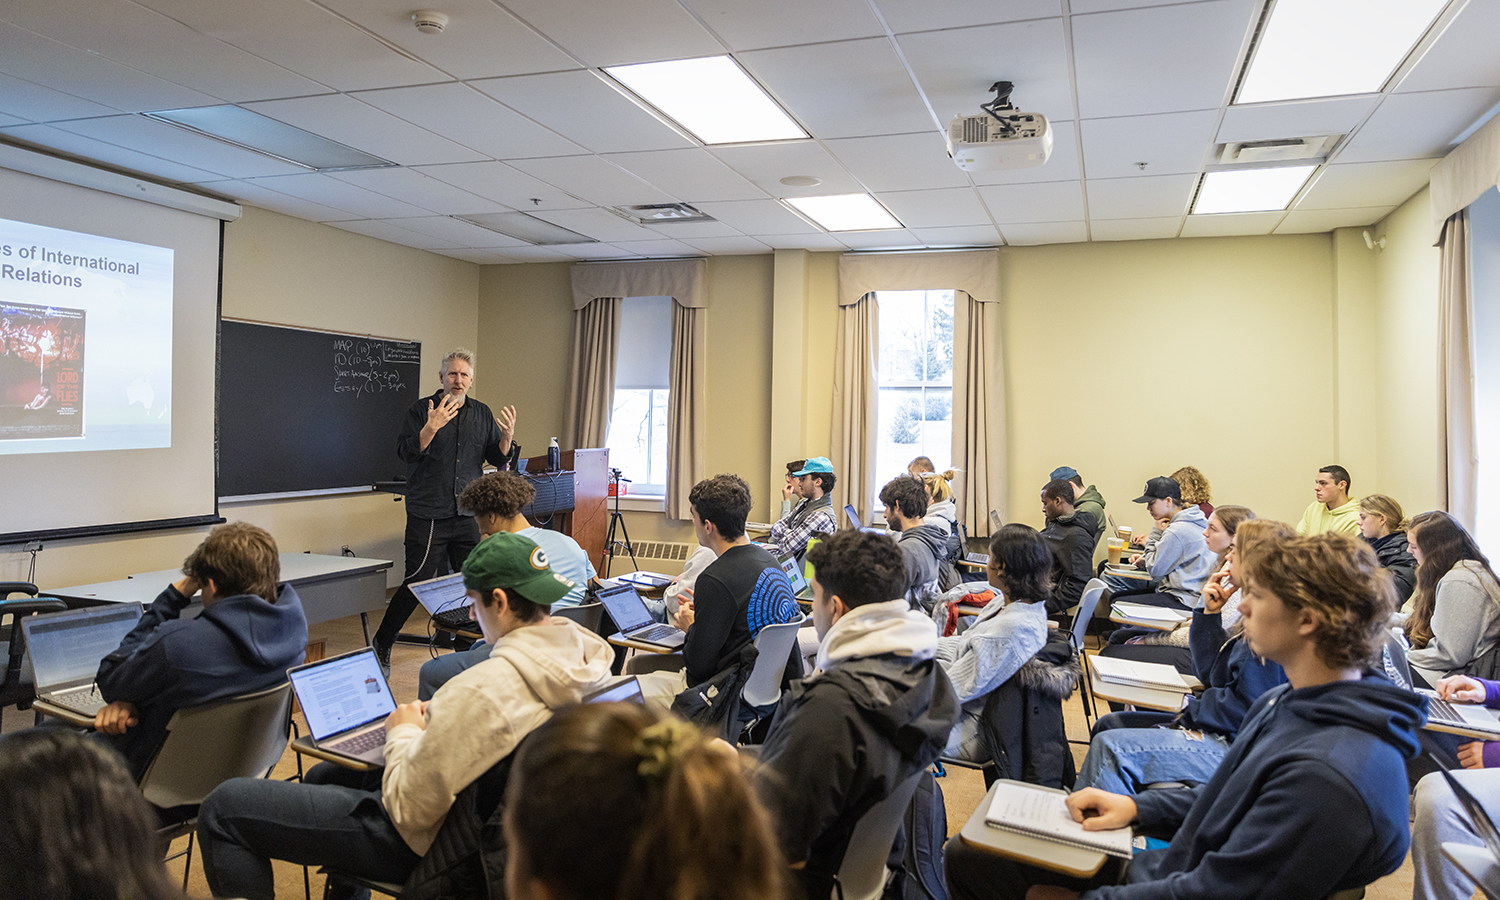 In This Week in Photos, we showcase our extraordinary faculty, who are recognized as the best by the Princeton Review. Here, Professor of International Relations Kevin Dunn teaches “Introduction to International Relations” in Stern Hall.